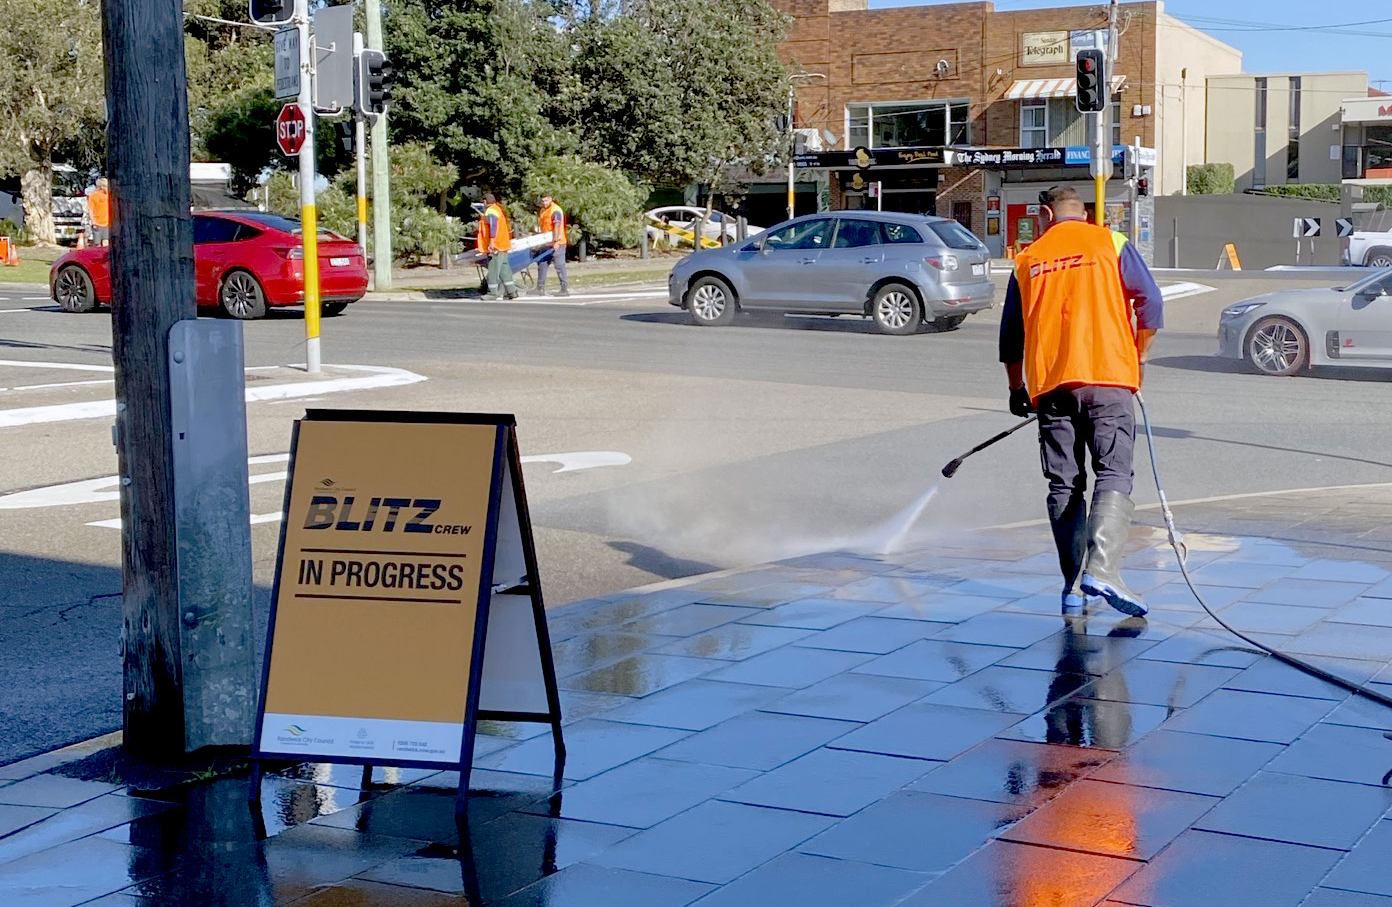 An image of a man steam cleaning pavements in Malabar.